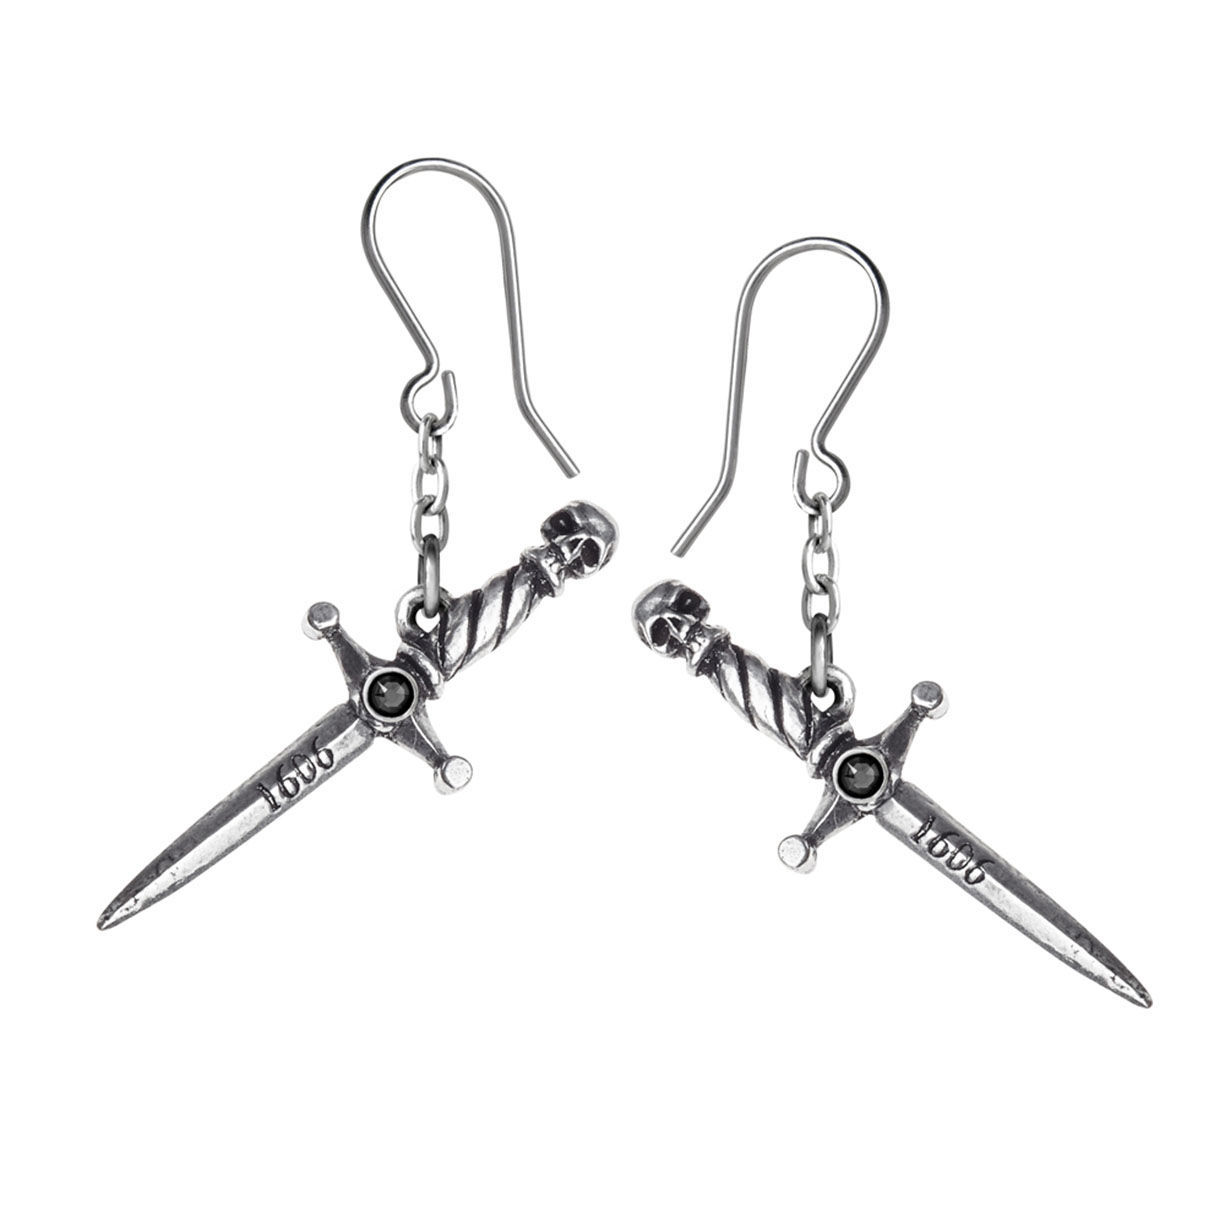 Hand of Macbeth earrings of small, antiqued daggers each have a small, black cabochon on the hilt and blades engraved with "1606"